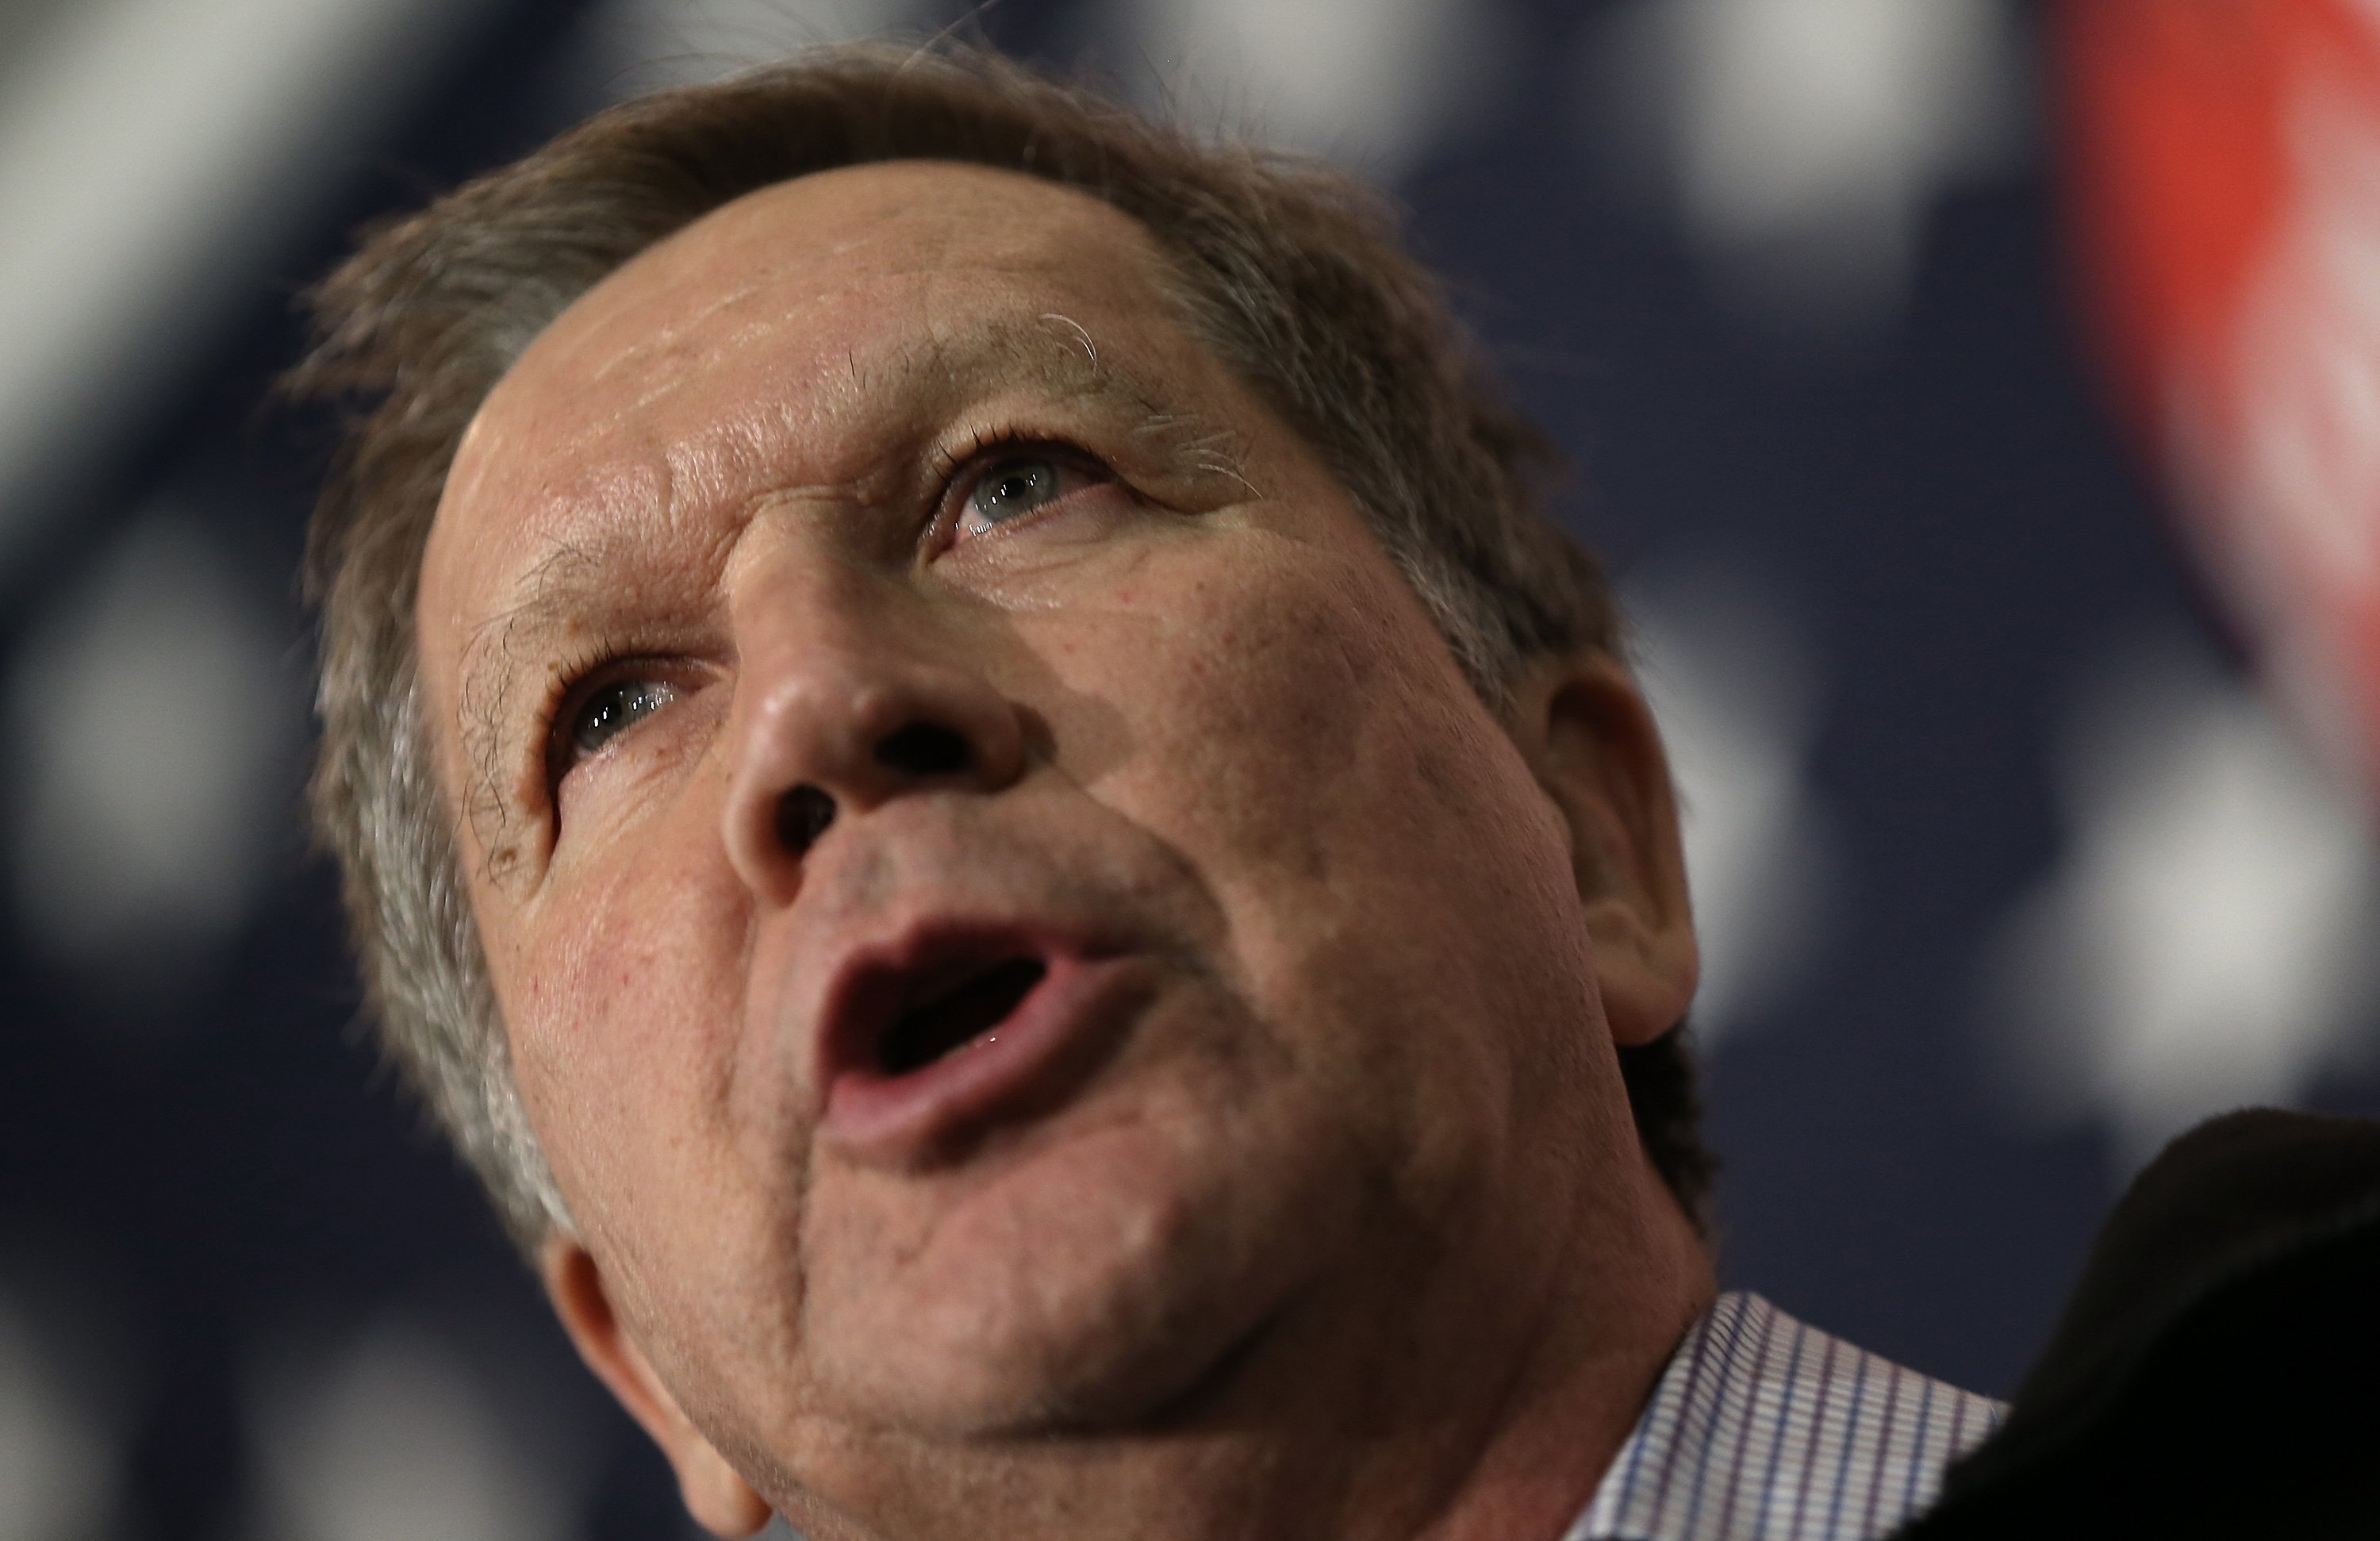 Ohio Gov. and Republican presidential candidate John Kasich at a campaign appearance on Feb. 19, 2016 in Mount Pleasant, South Carolina. (Win McNamee—Getty Images)